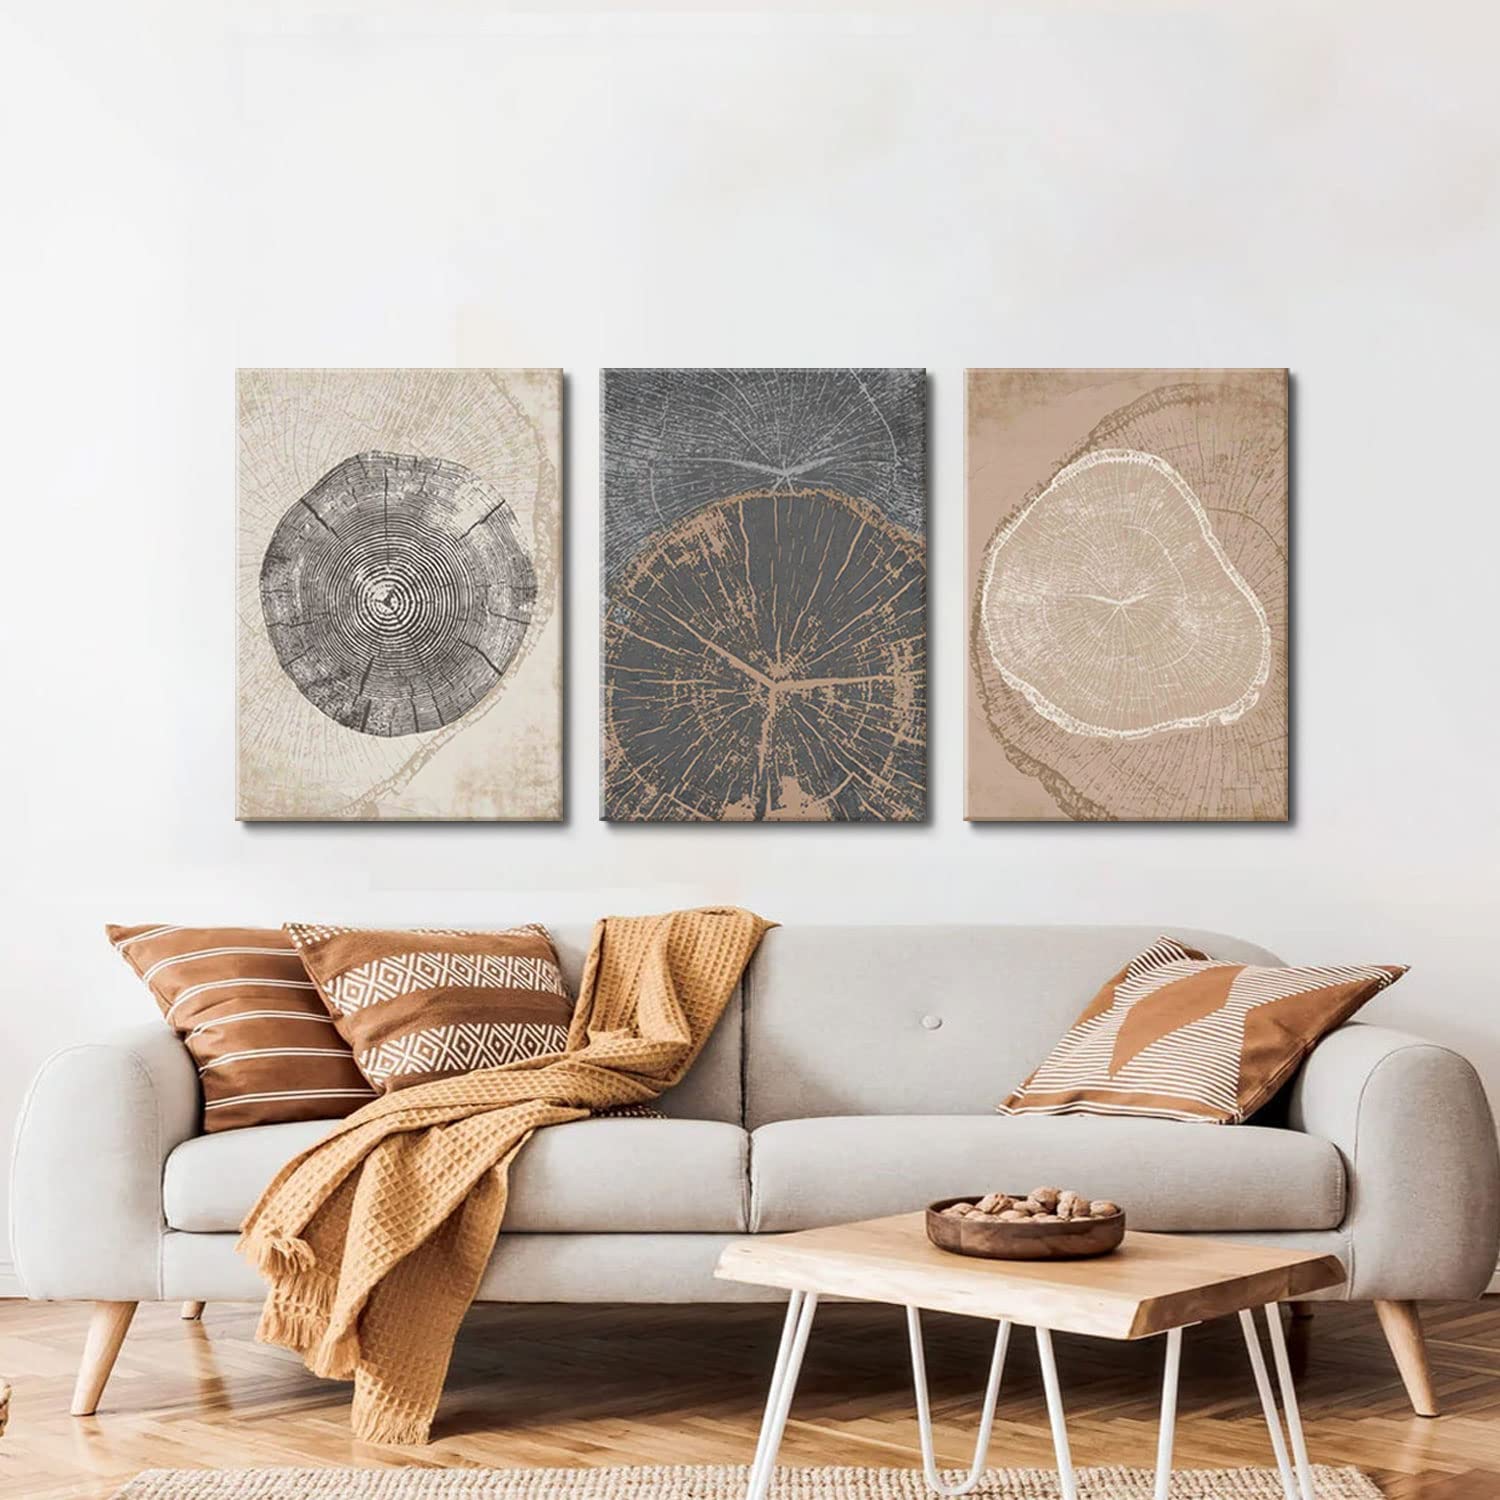 AKWISH 3Pcs Framed Tree Ring Canvas Wall Art Print Pastel Gray Wood Spirals Picture Nature Abstract Drawings Poster Modern Minimalist Wall Decor for Living Room Bedroom Home Office 16"x24"x3